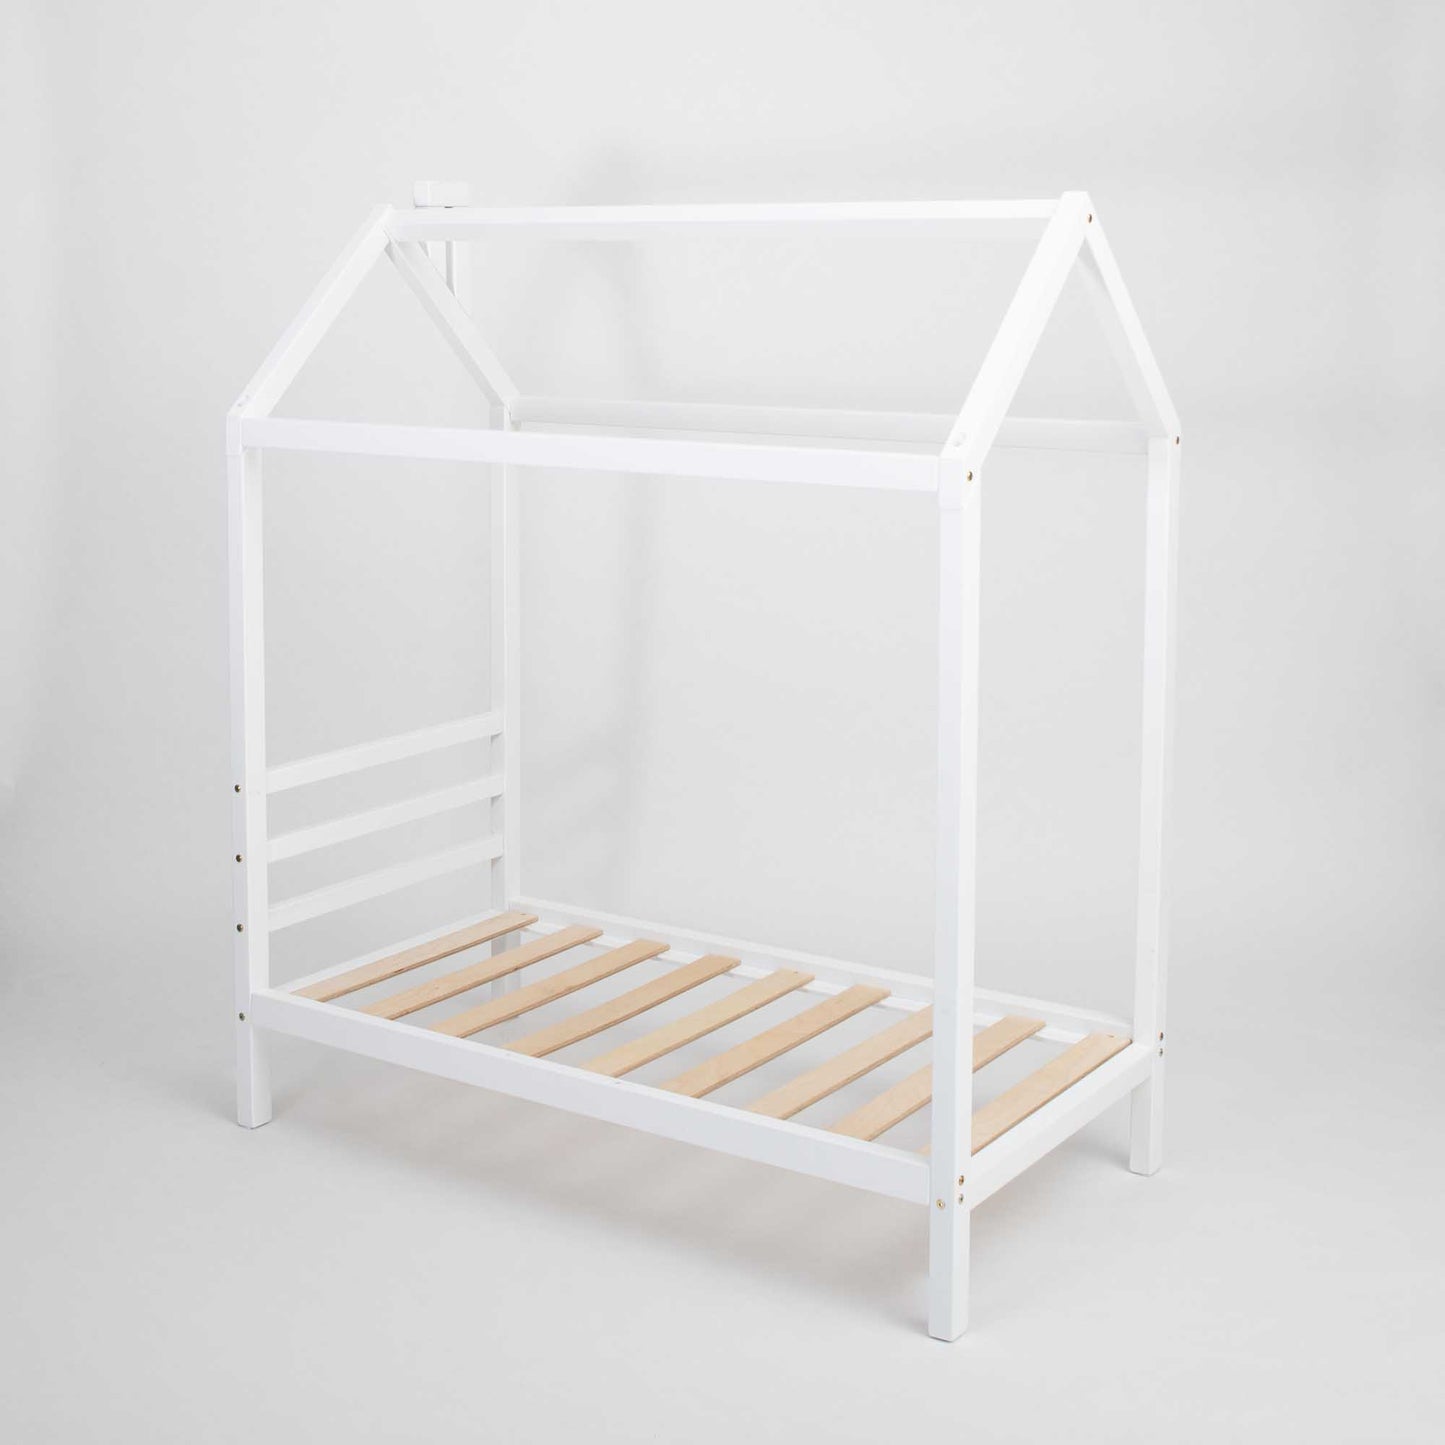 A white Kids' house bed on legs with a headboard, with wooden slats and a wooden frame.